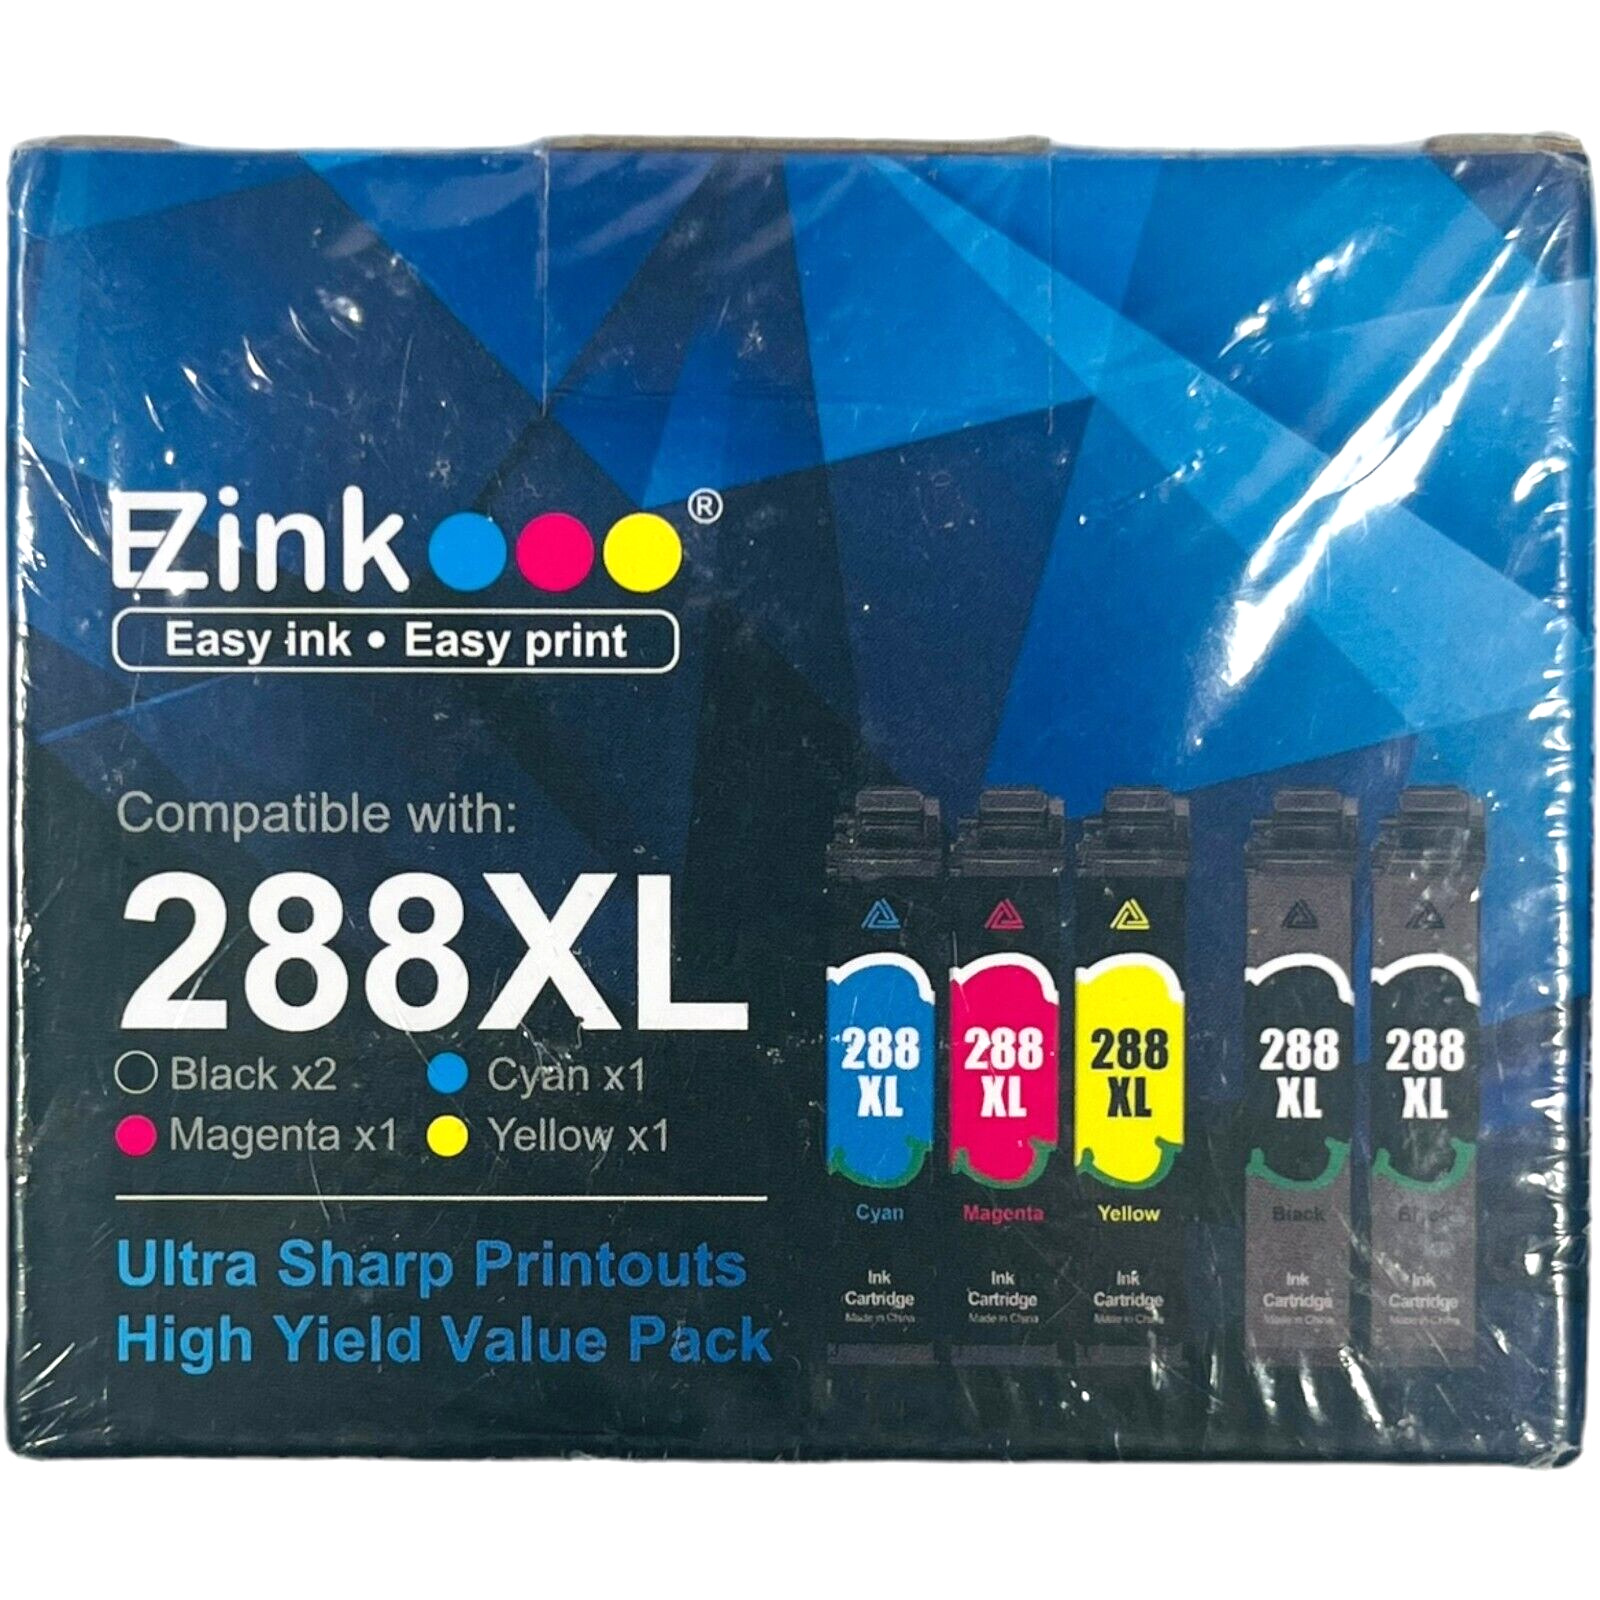 EZ ink 288XL 2 Black, 1 Cyan, 1 Magenta and 1 Yellow Cartridge - NEW and Sealed